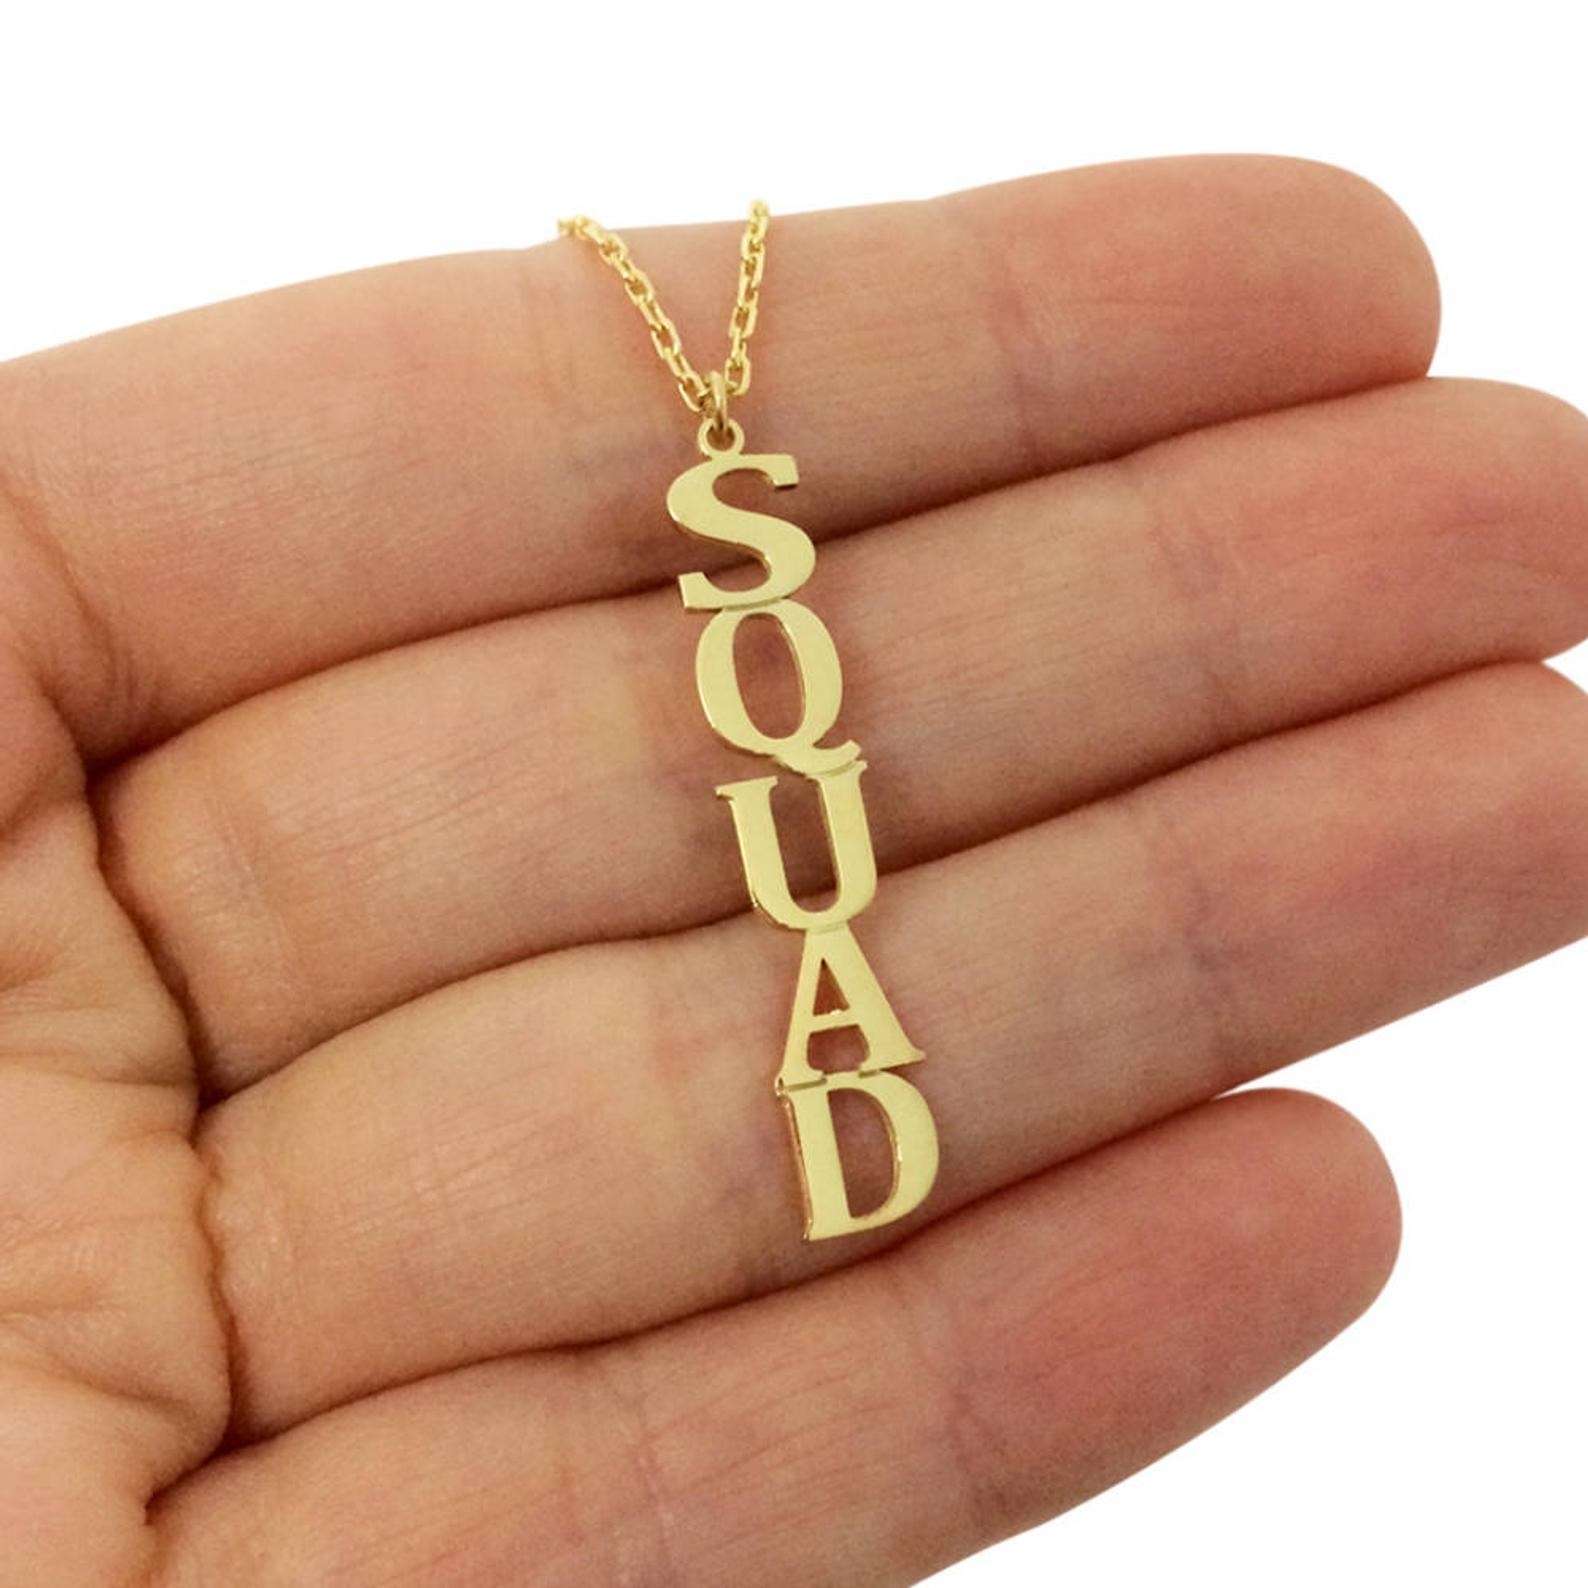 A gold necklace with a vertical name pendant